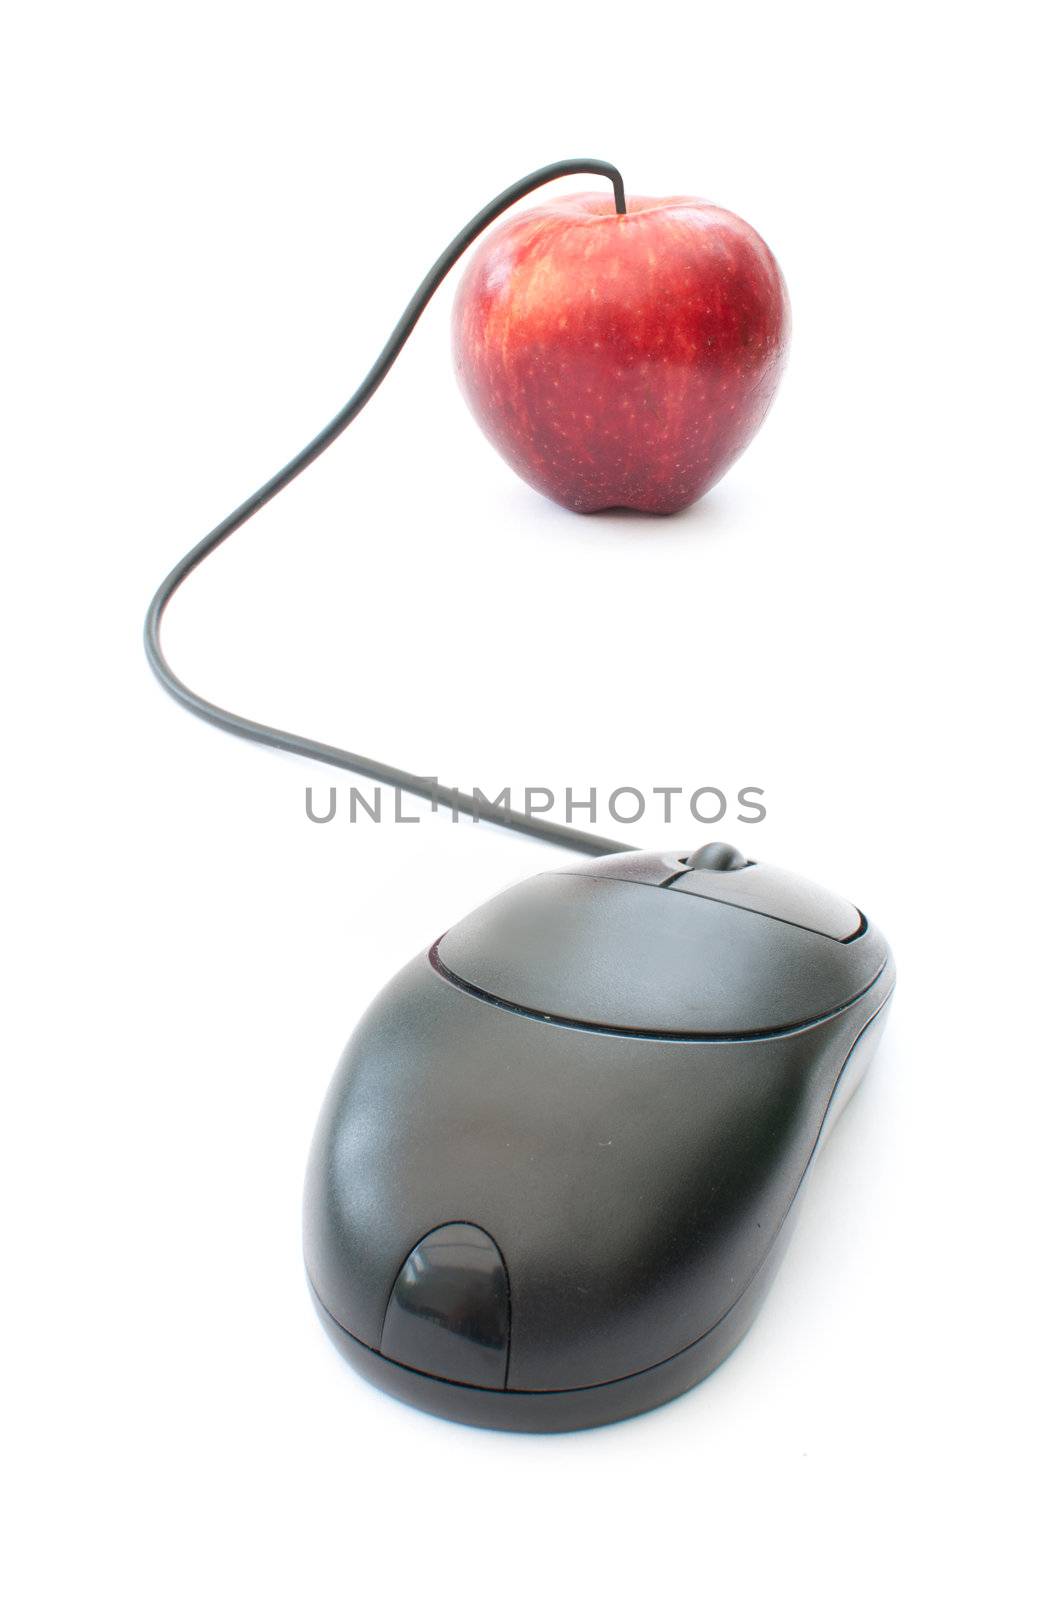 Computer cable attached to a red apple 